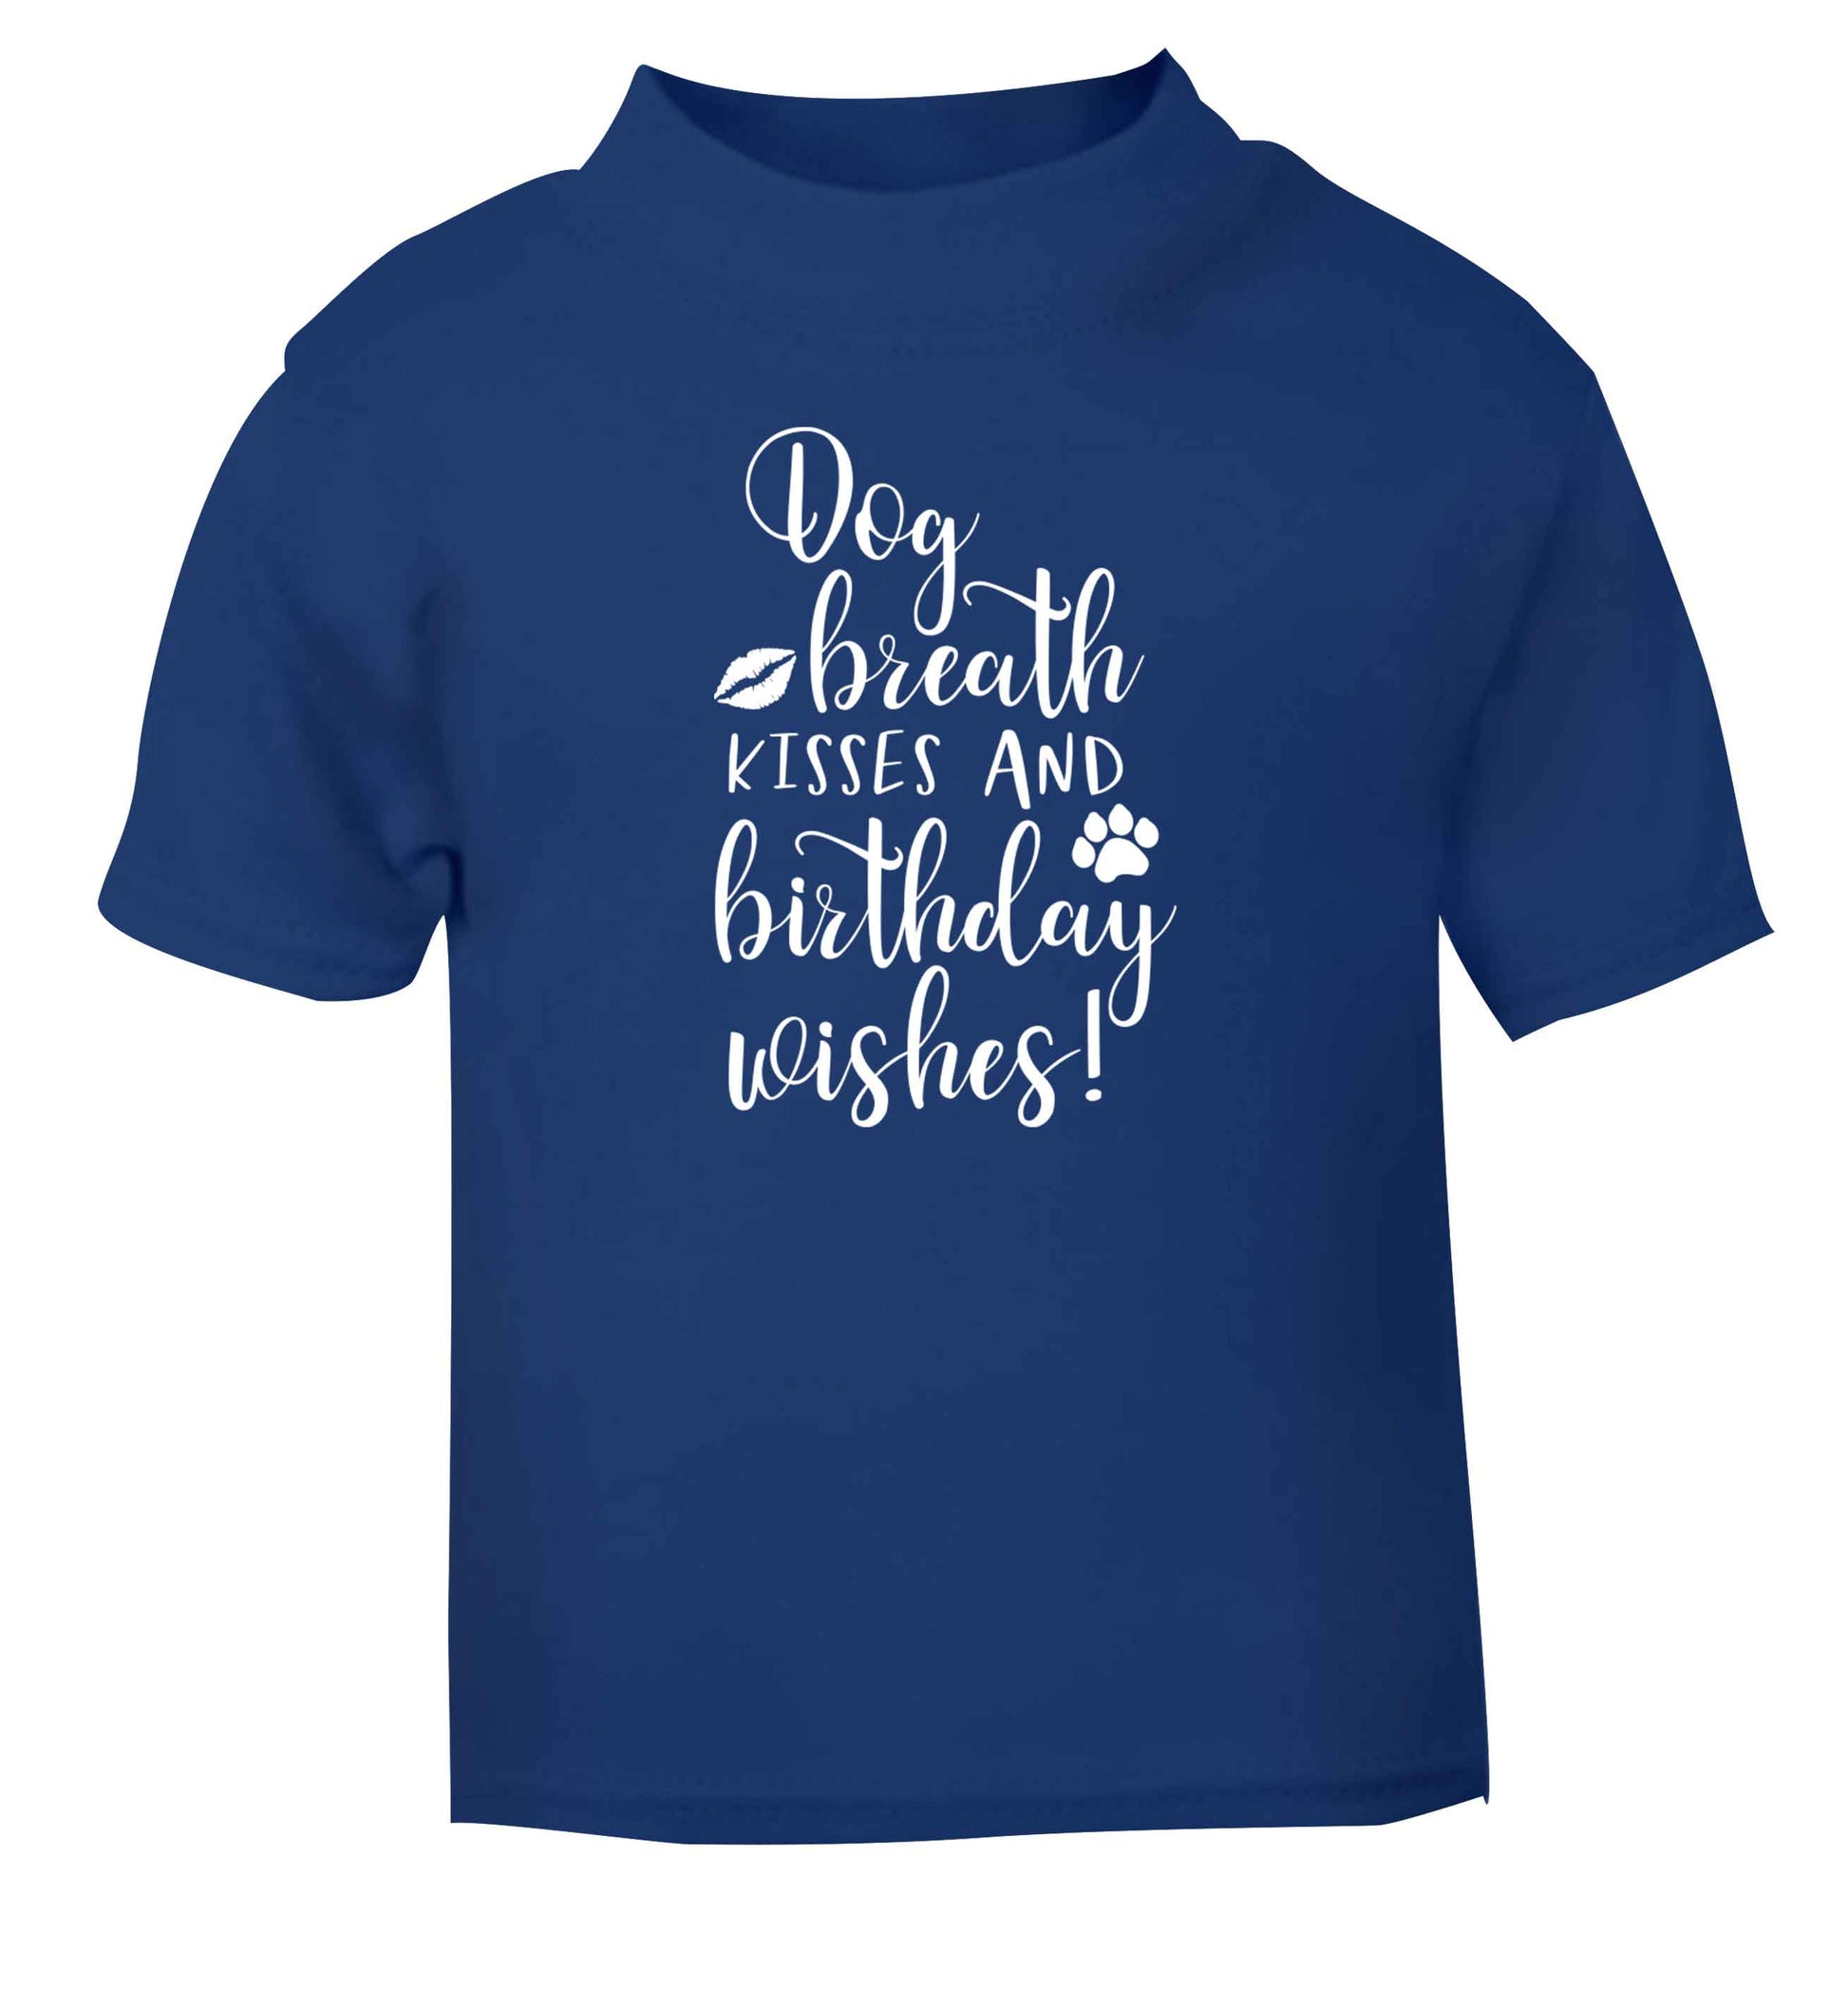 Dog breath kisses and christmas wishes blue Baby Toddler Tshirt 2 Years